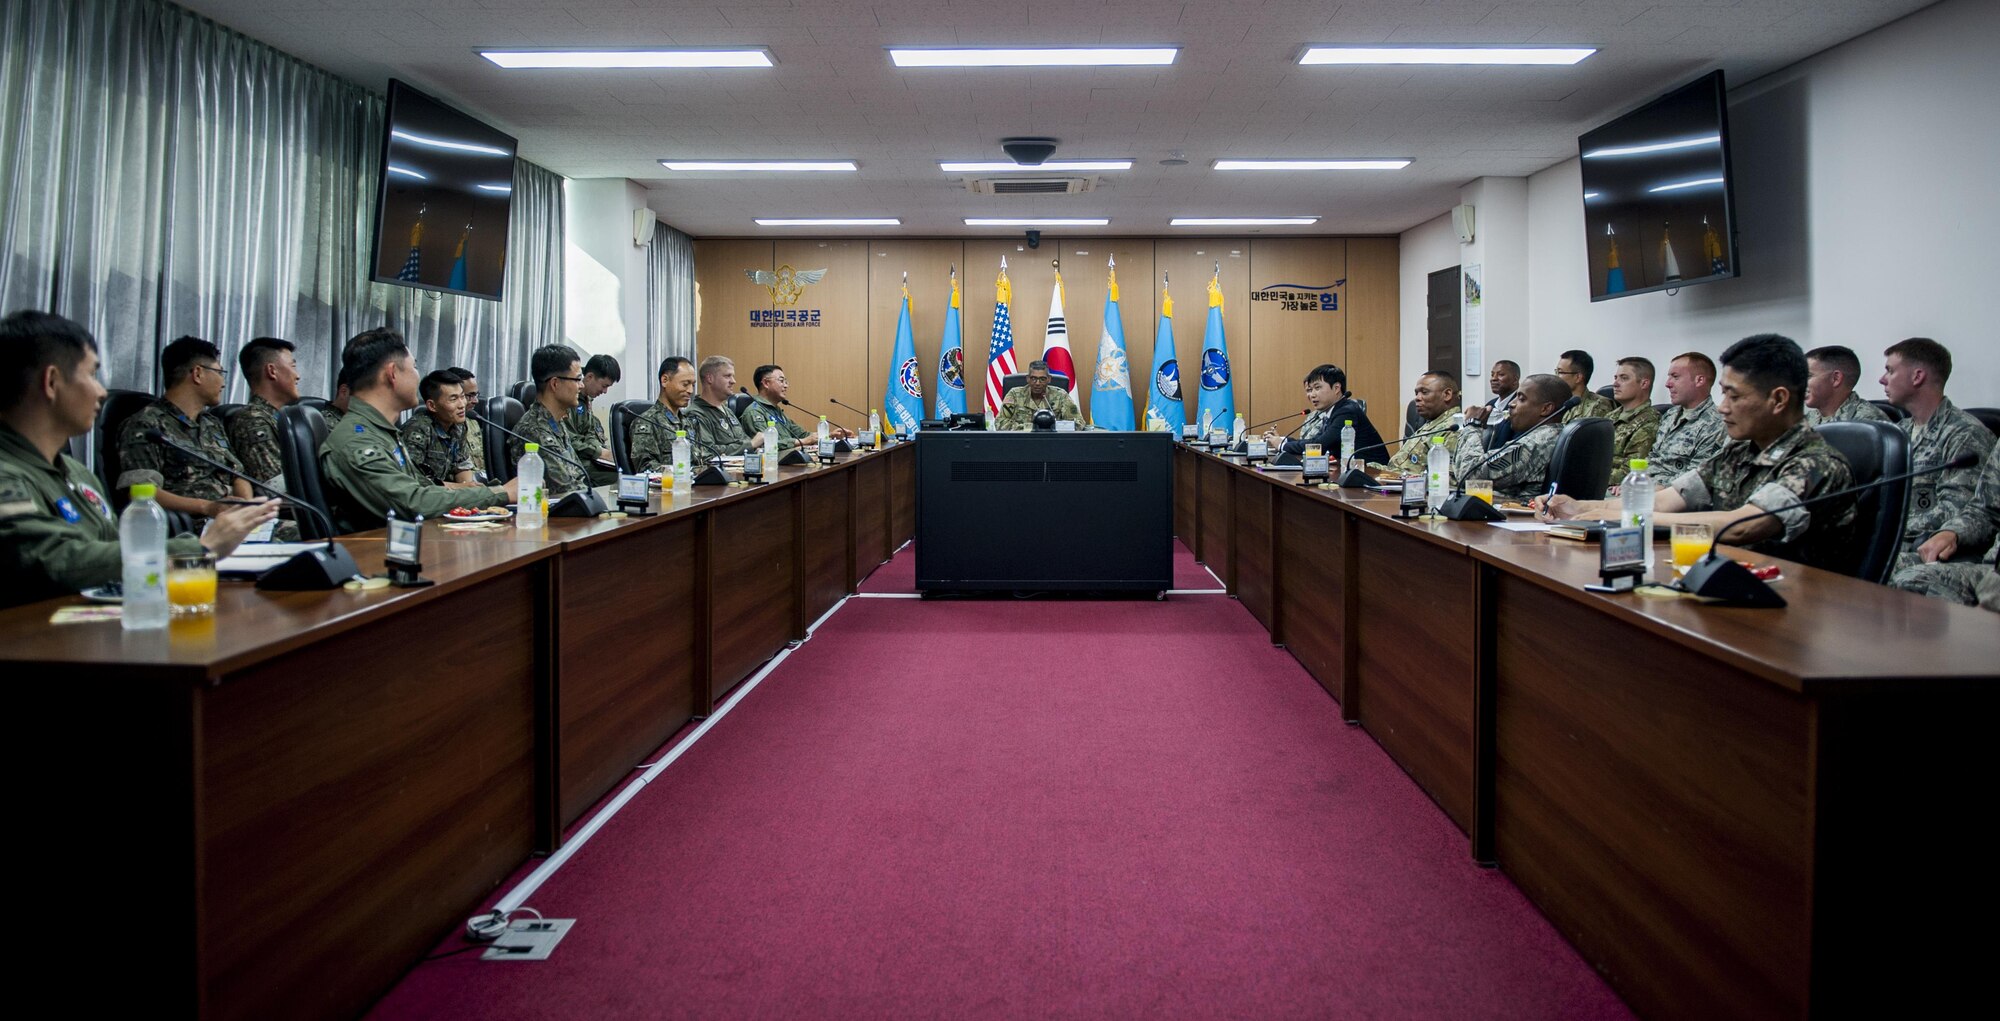 U.S. Army Gen. Vincent K. Brooks, U.S. Forces Korea commander, receives a briefing about the Republic of Korea Air Force and U.S. Air Force partnership June 22, 2017, while in the 38th Fighter Group Headquarters at Kunsan Air Base, Republic of Korea. 38th FG leadership briefed Brooks on the Republic of Korea Air Force heritage and how they’ve progressed to a integrated fighting force with the U.S. for the defense of Korean peninsula. (U.S. Air Force photo by Senior Airman Colville McFee/Released)